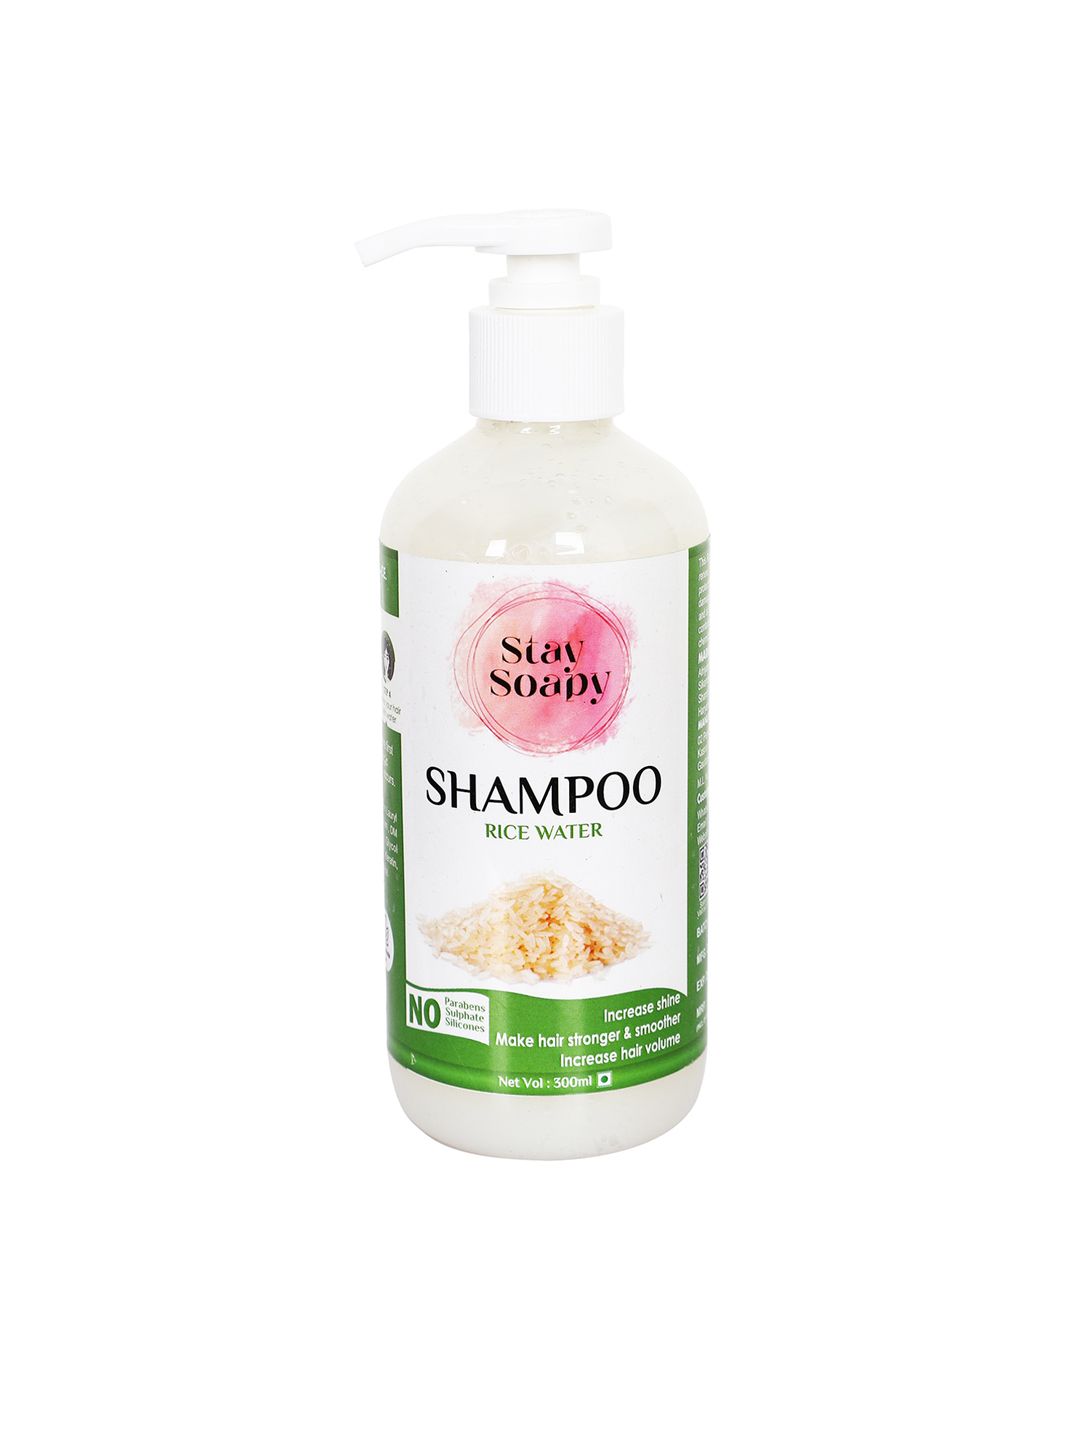 Stay Soapy Rice Water Shampoo to Make Hair Stronger & Smoother - 300 ml Price in India